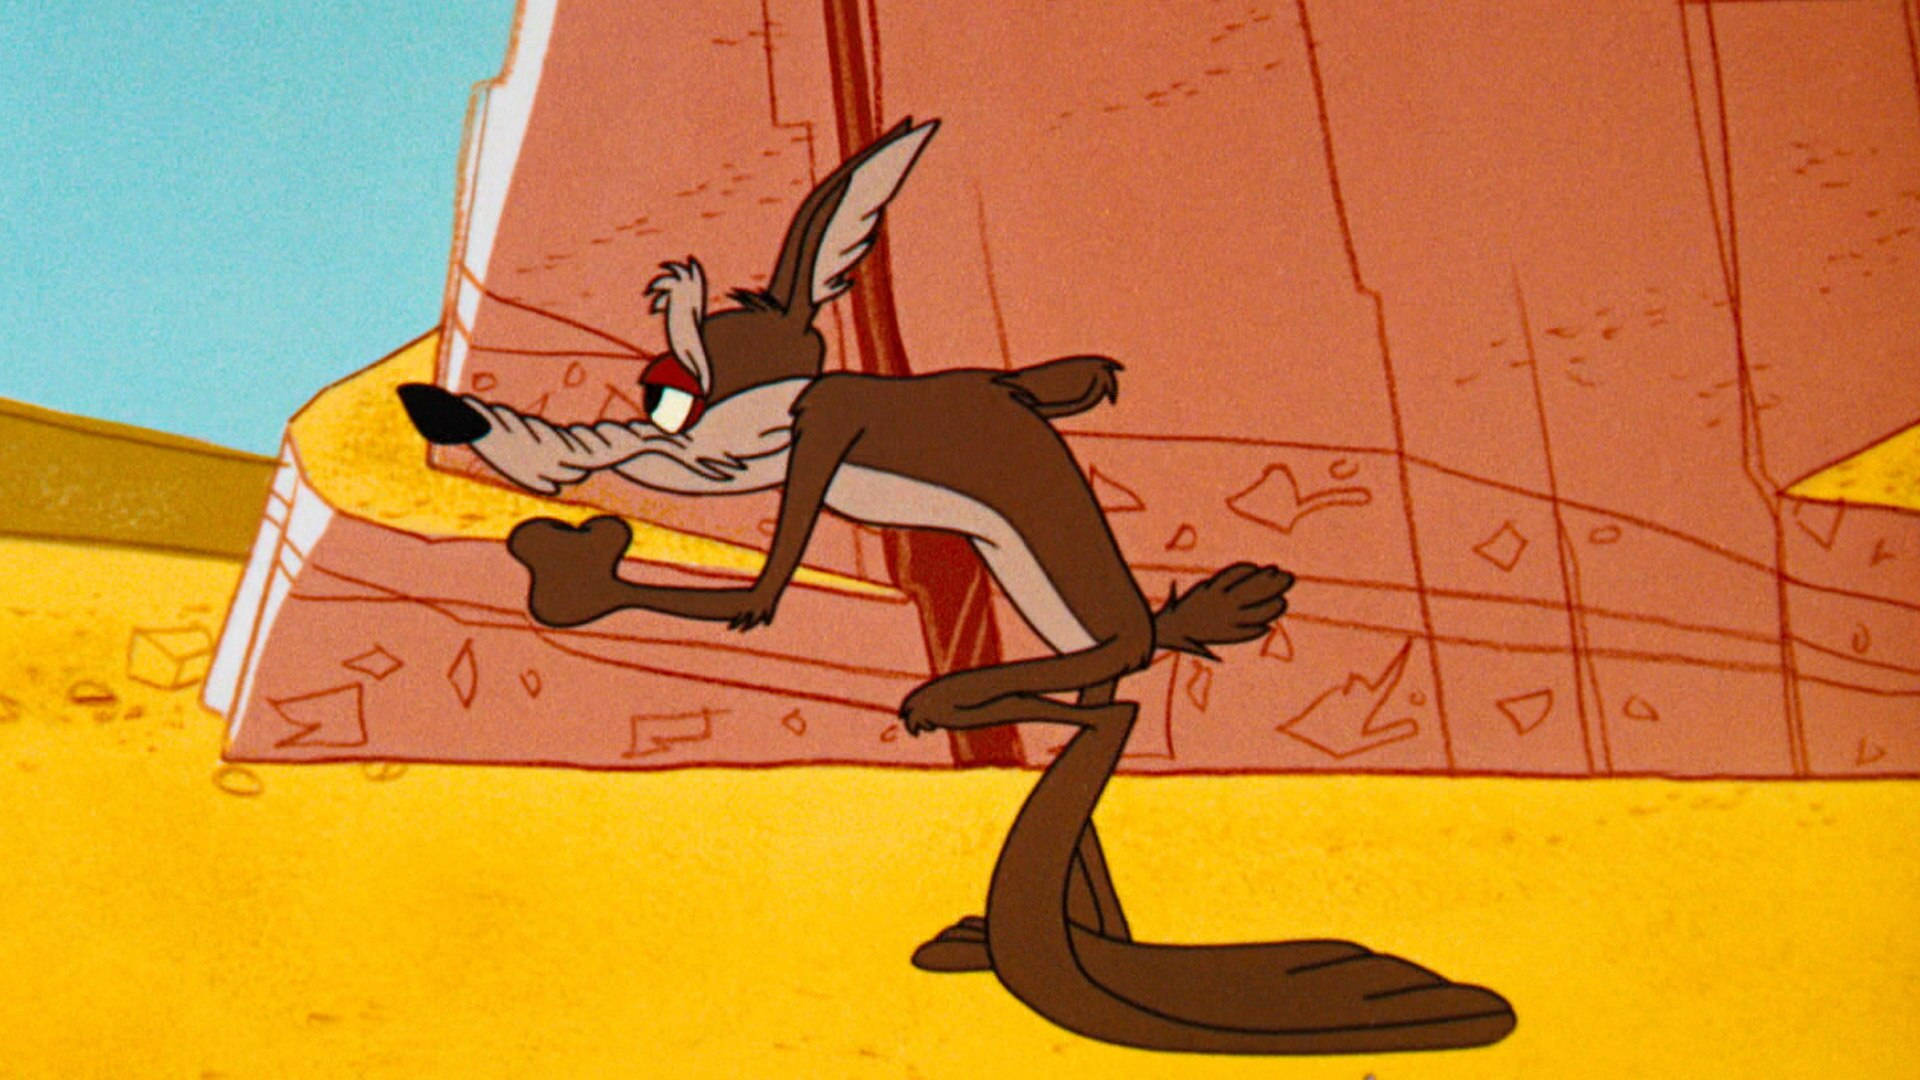 Wile E. Coyote Exhausted After Numerous Failed Attempts.